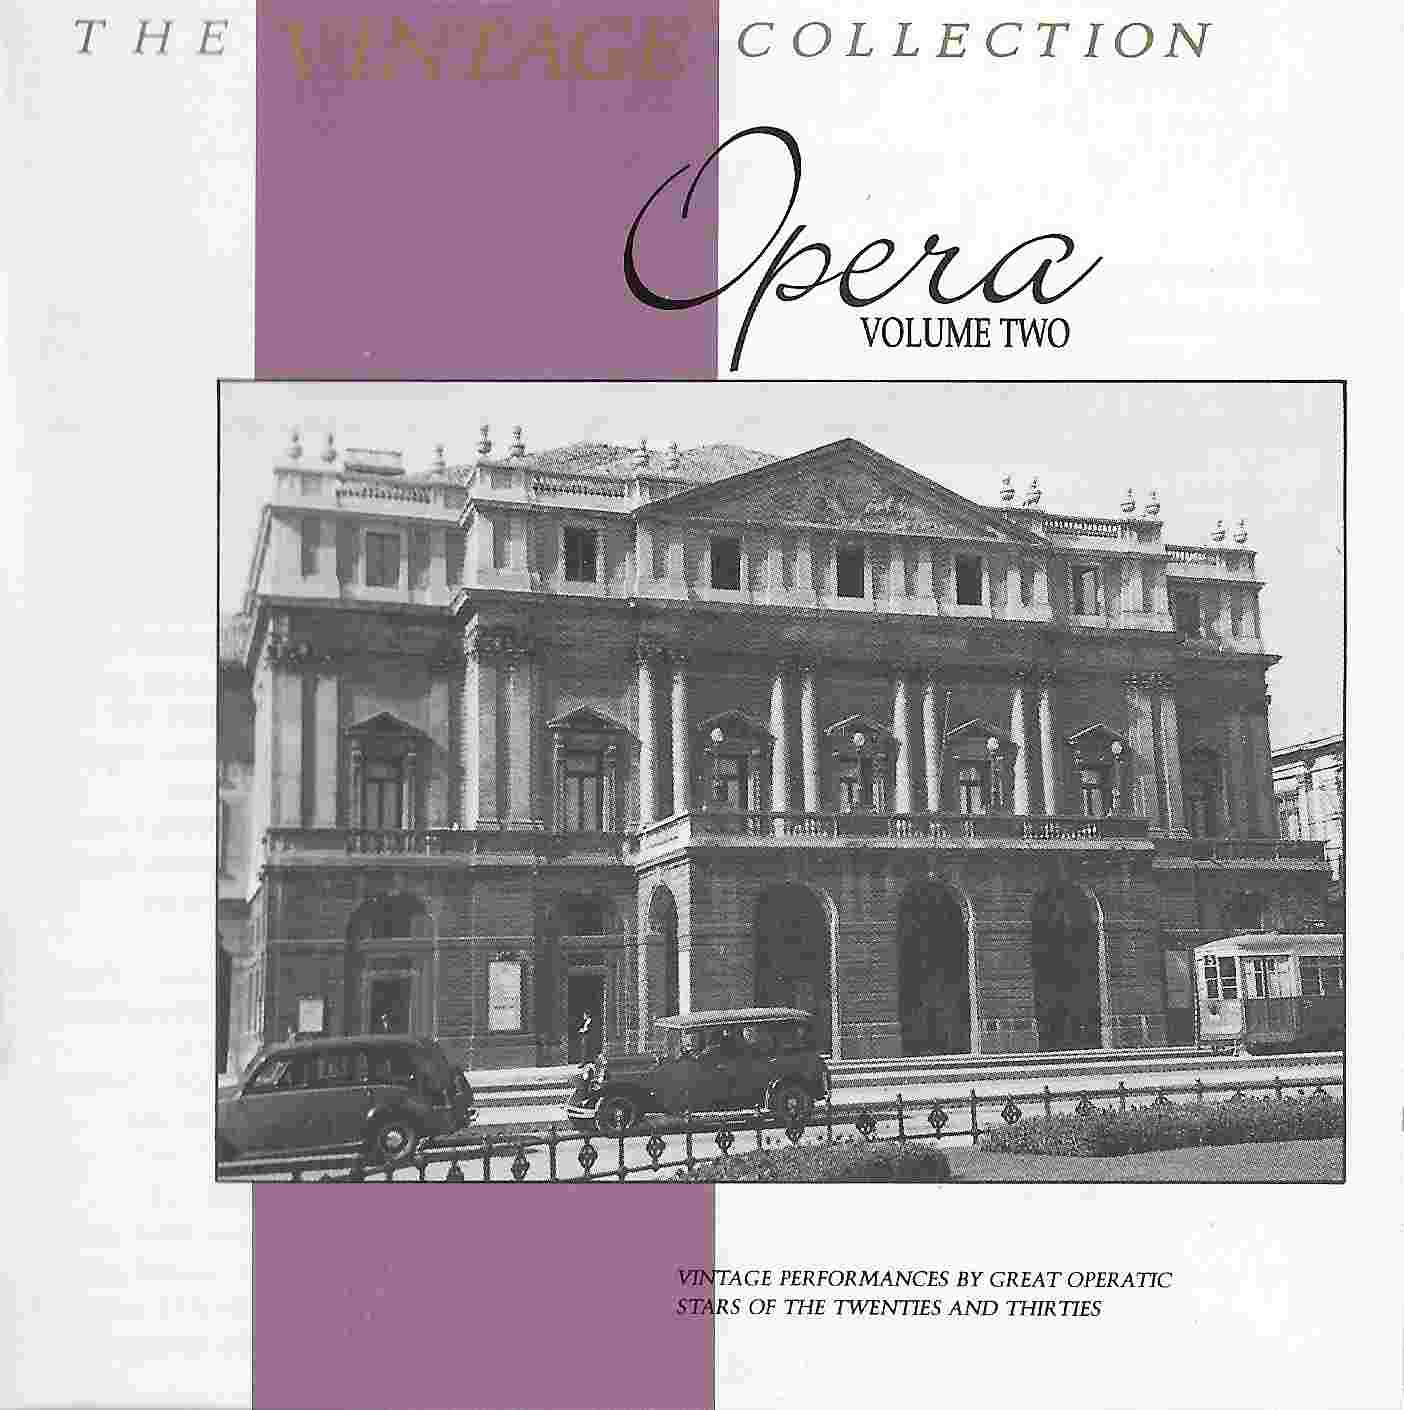 Picture of BBCCD781 The vintage collection - Opera II by artist Various from the BBC cds - Records and Tapes library